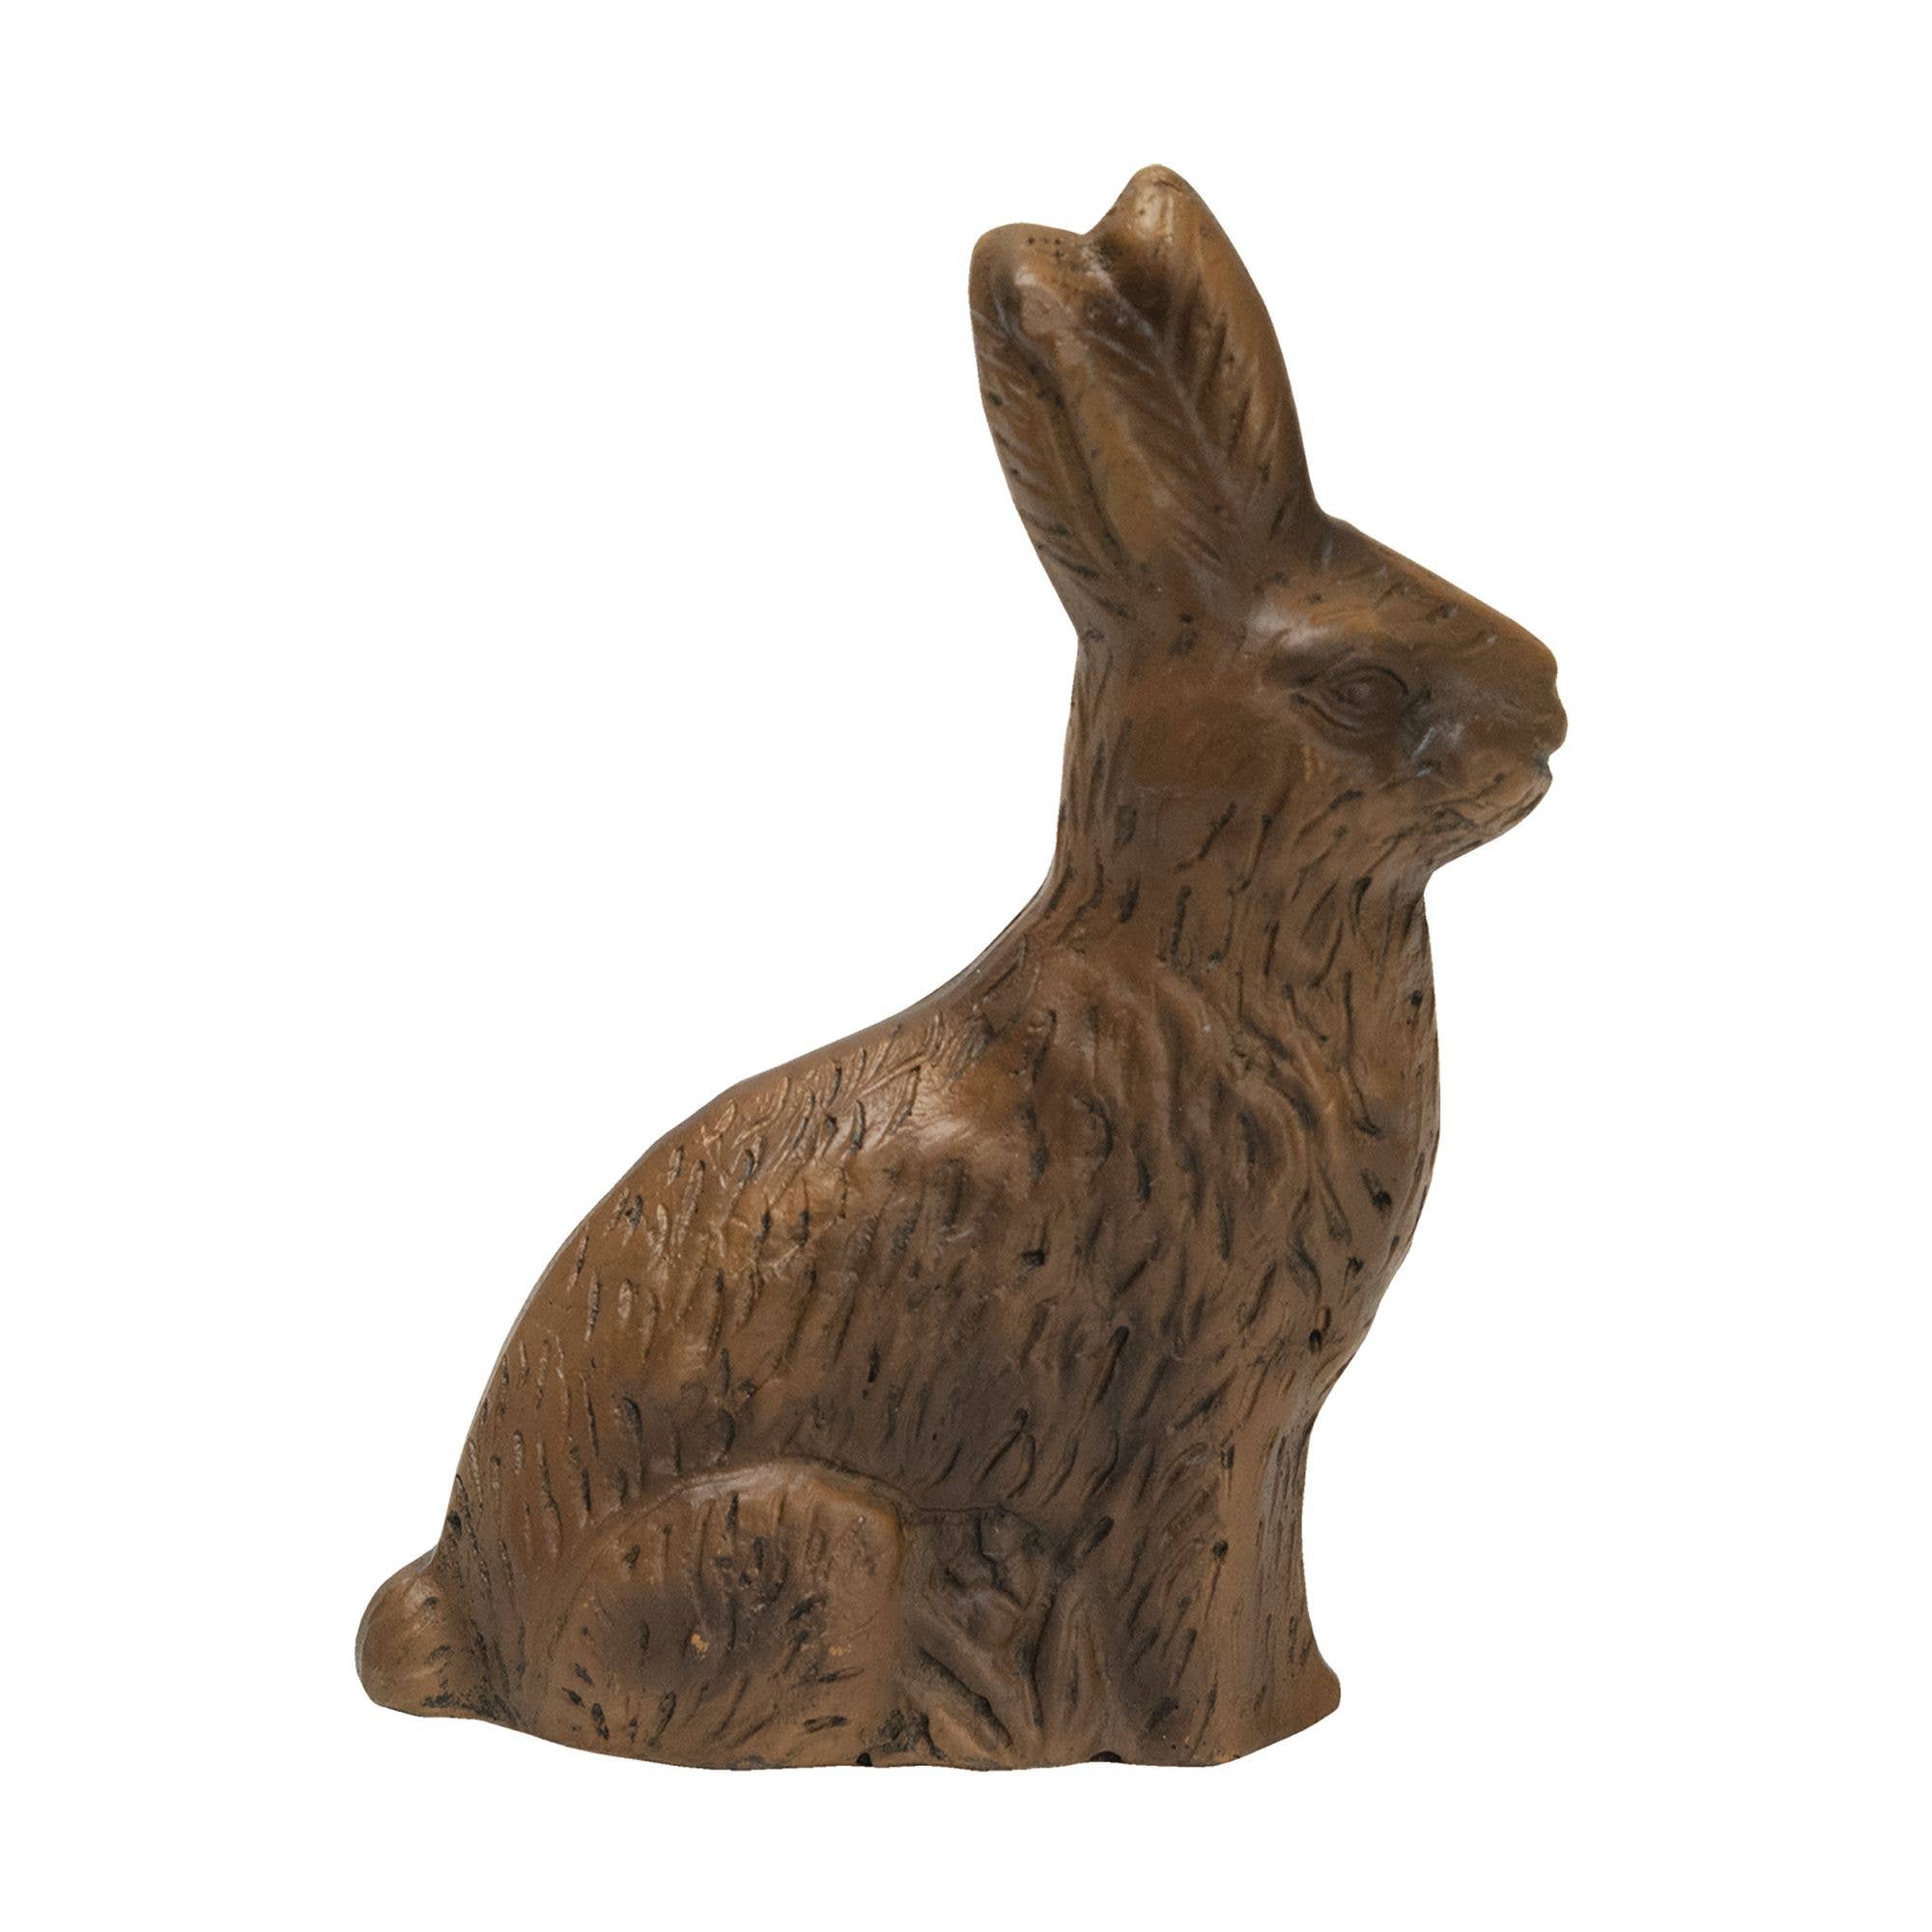 Purchase Wholesale bunny figurine. Free Returns & Net 60 Terms